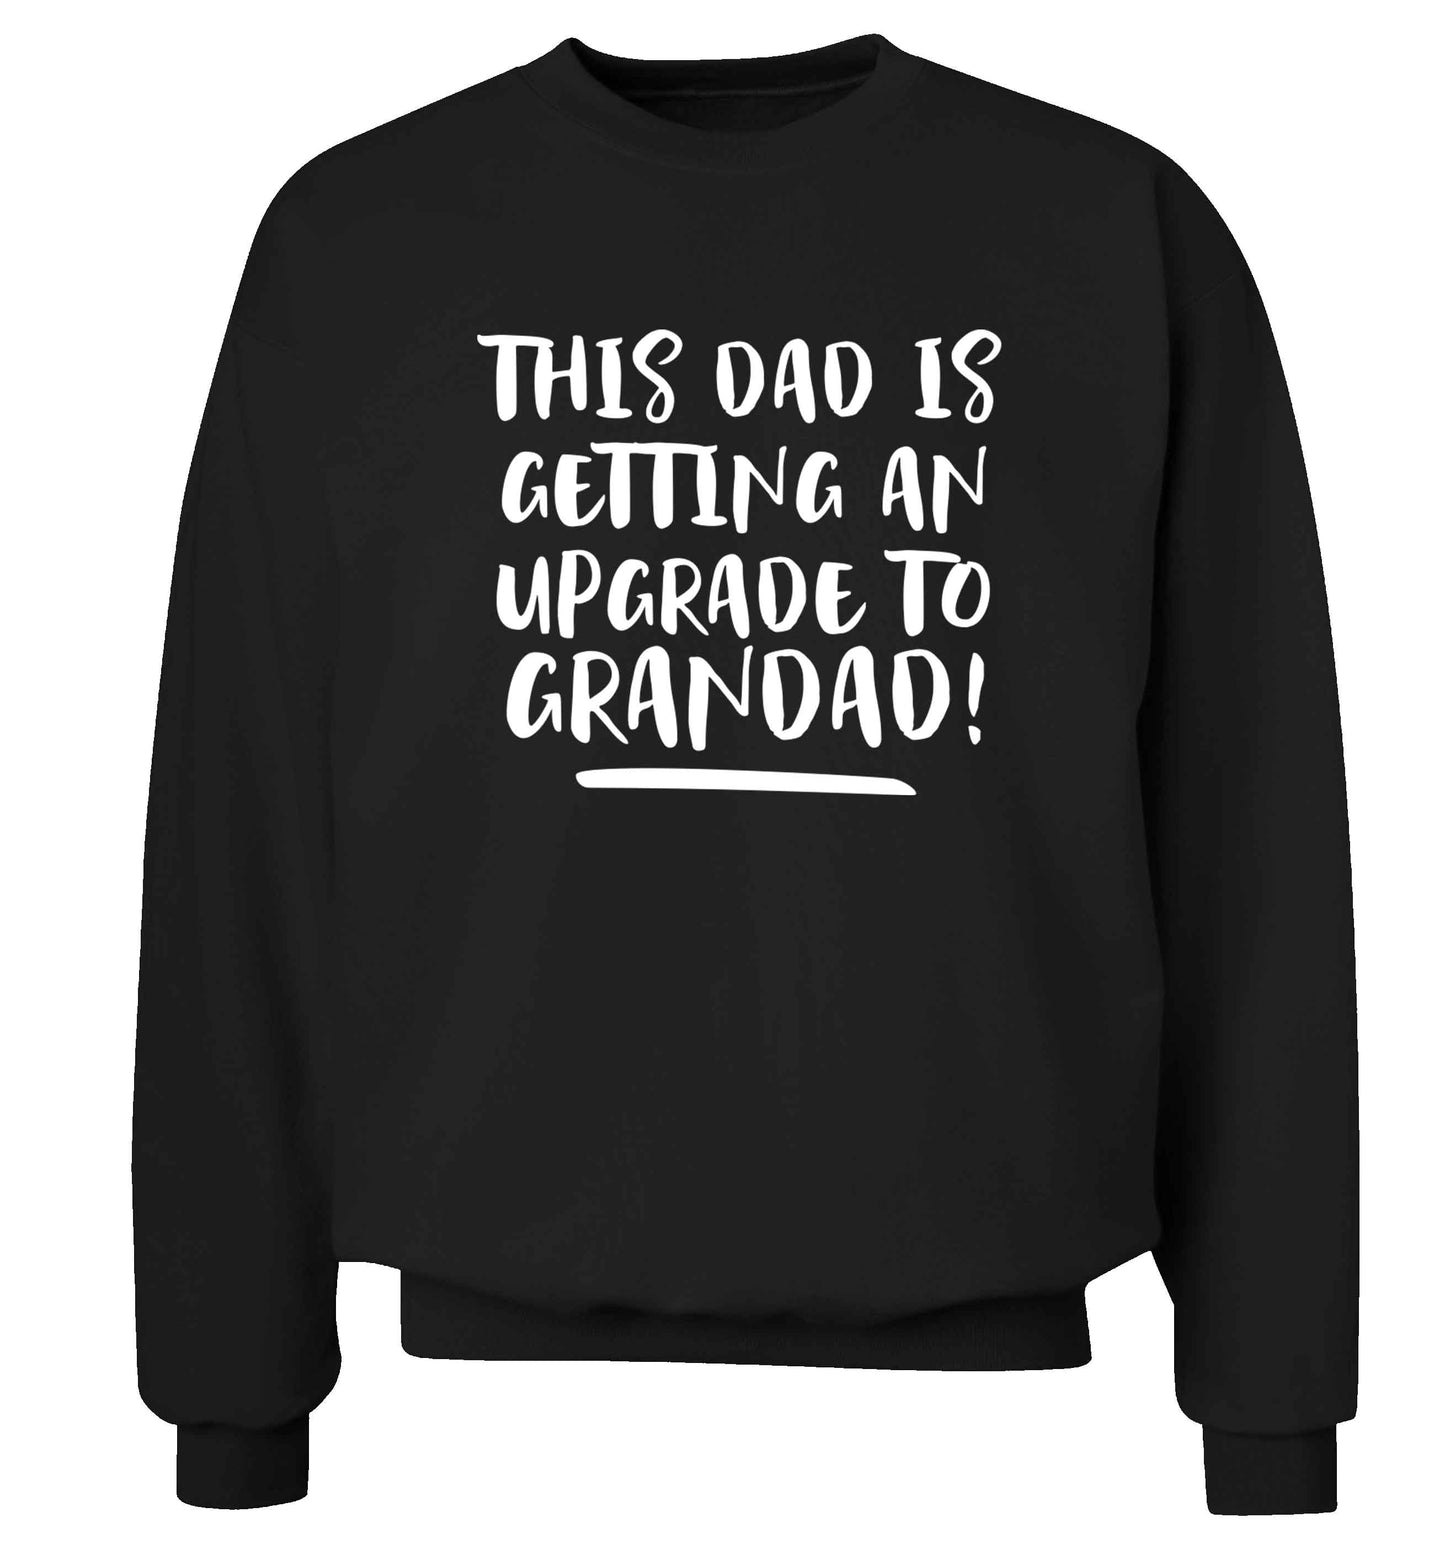 This dad is getting an upgrade to grandad! Adult's unisex black Sweater 2XL